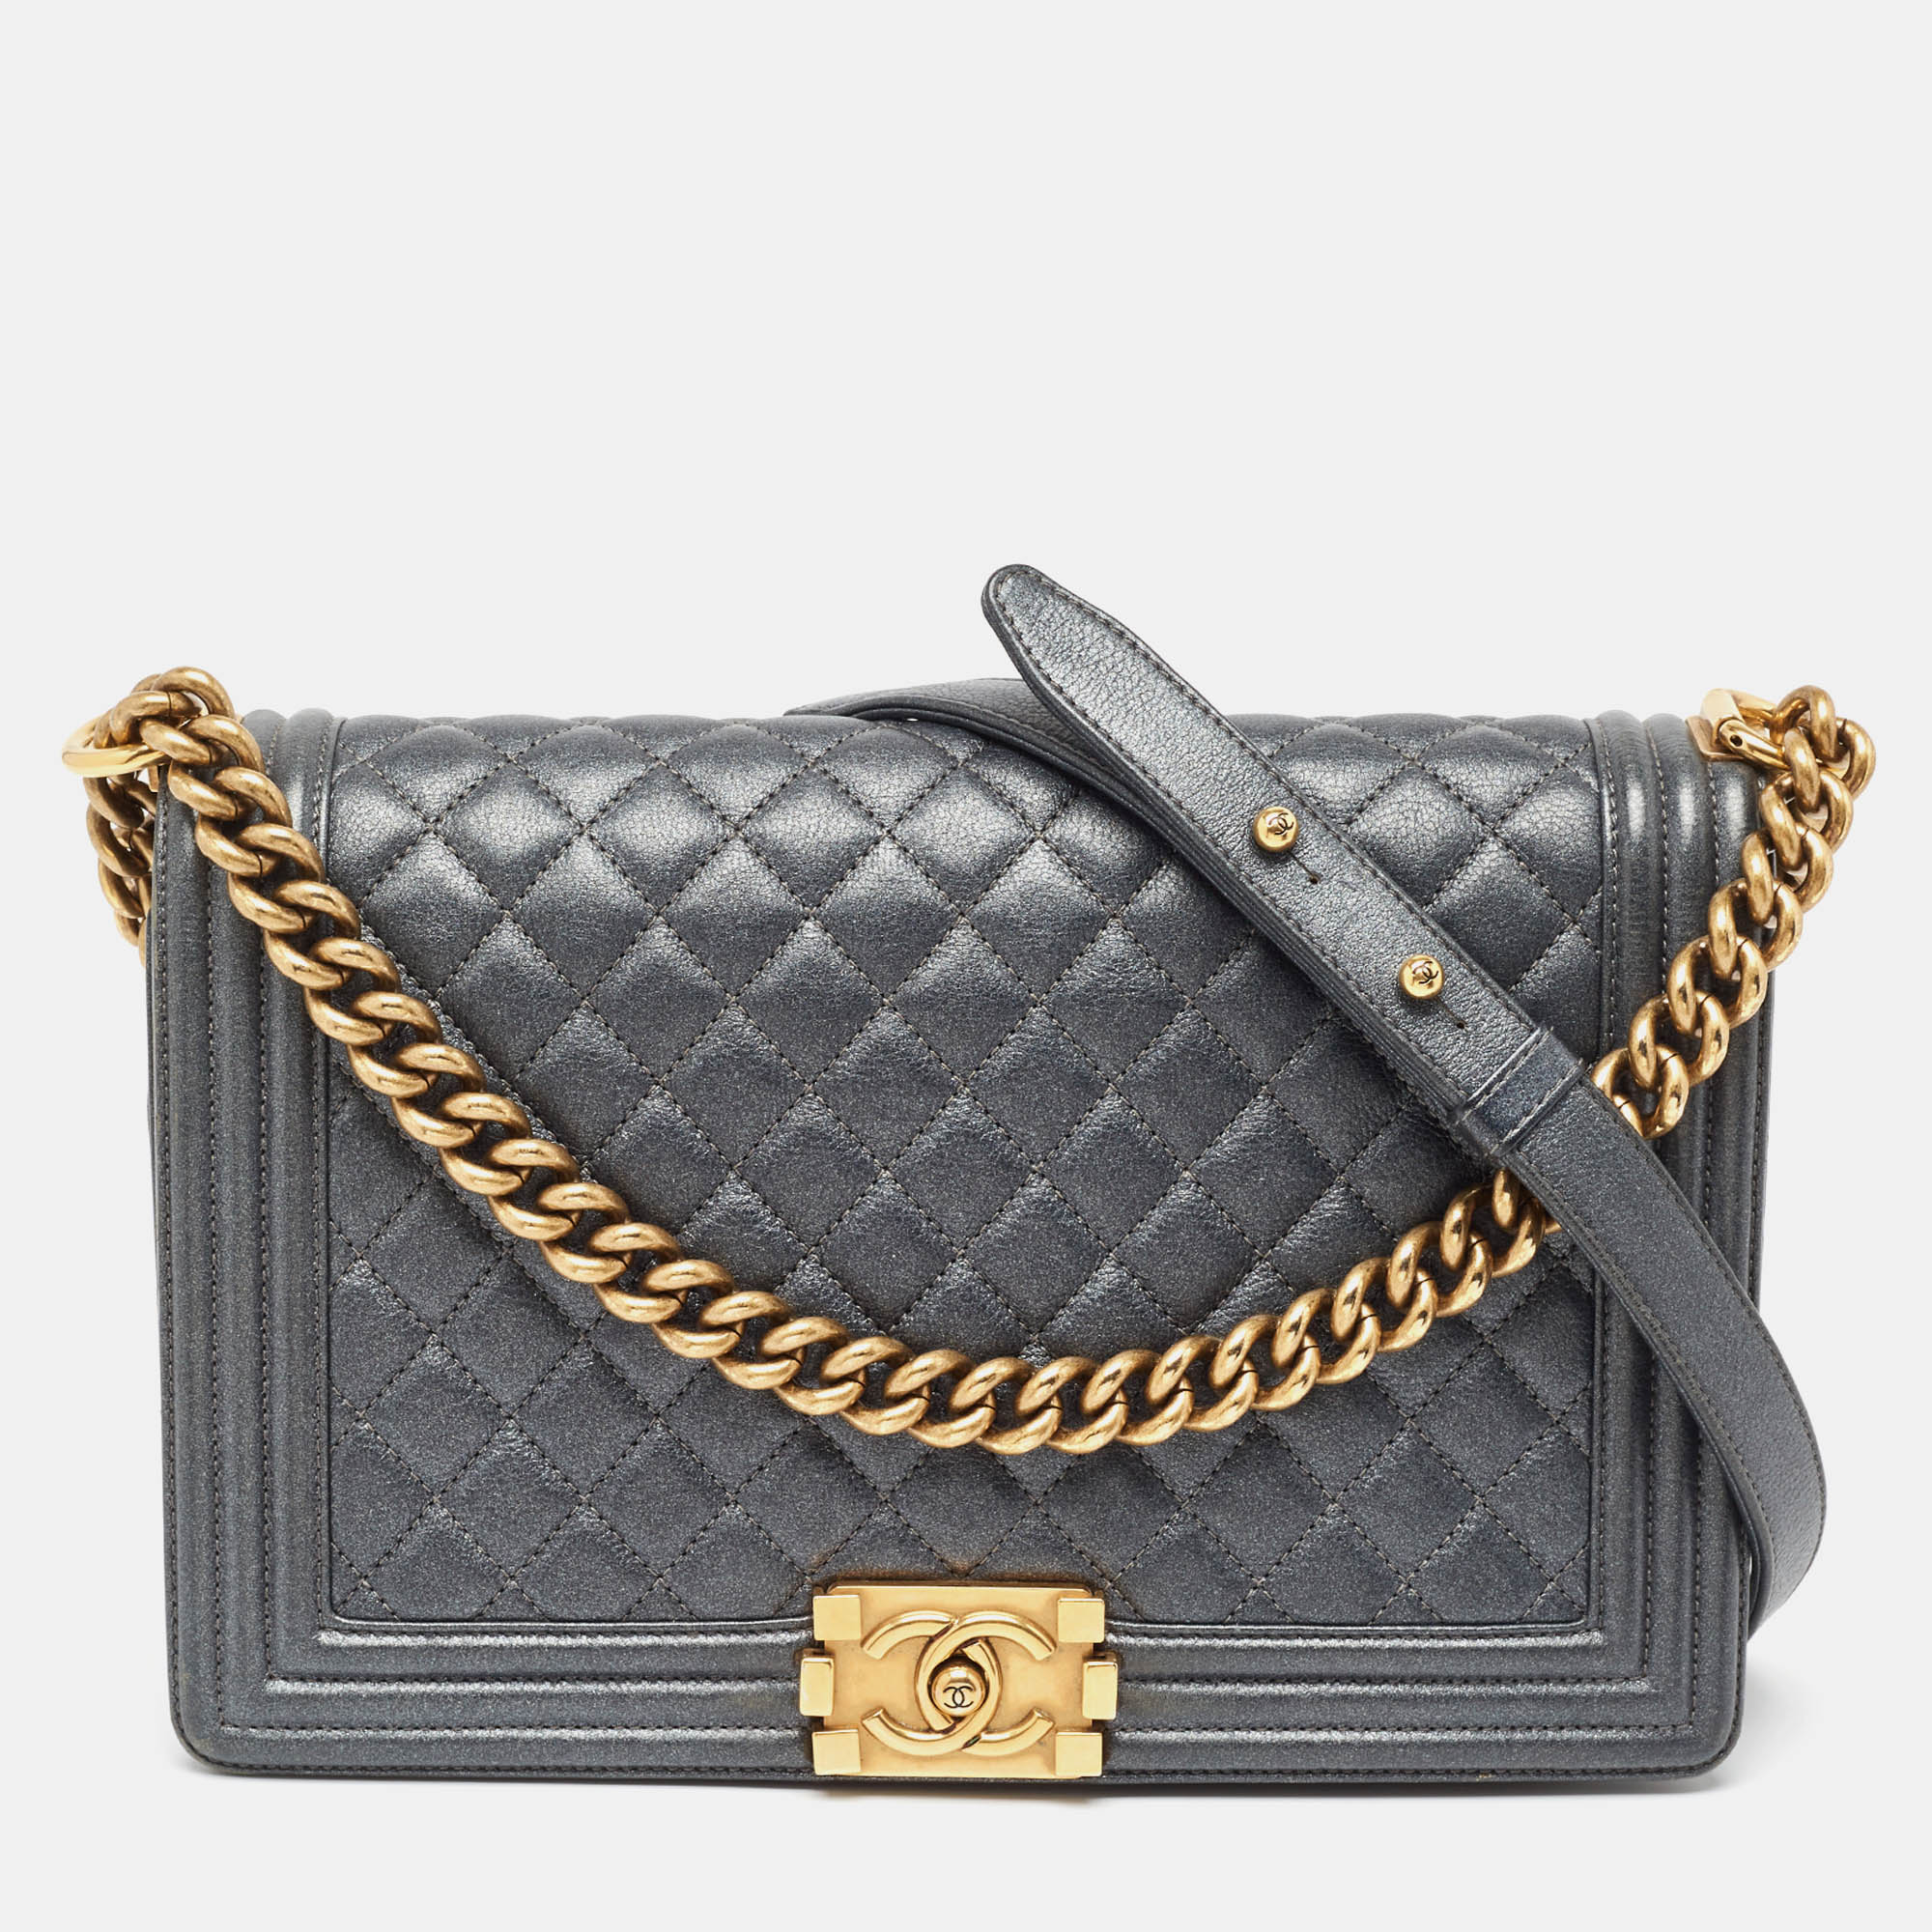 Chanel grey quilted leather new medium boy bag